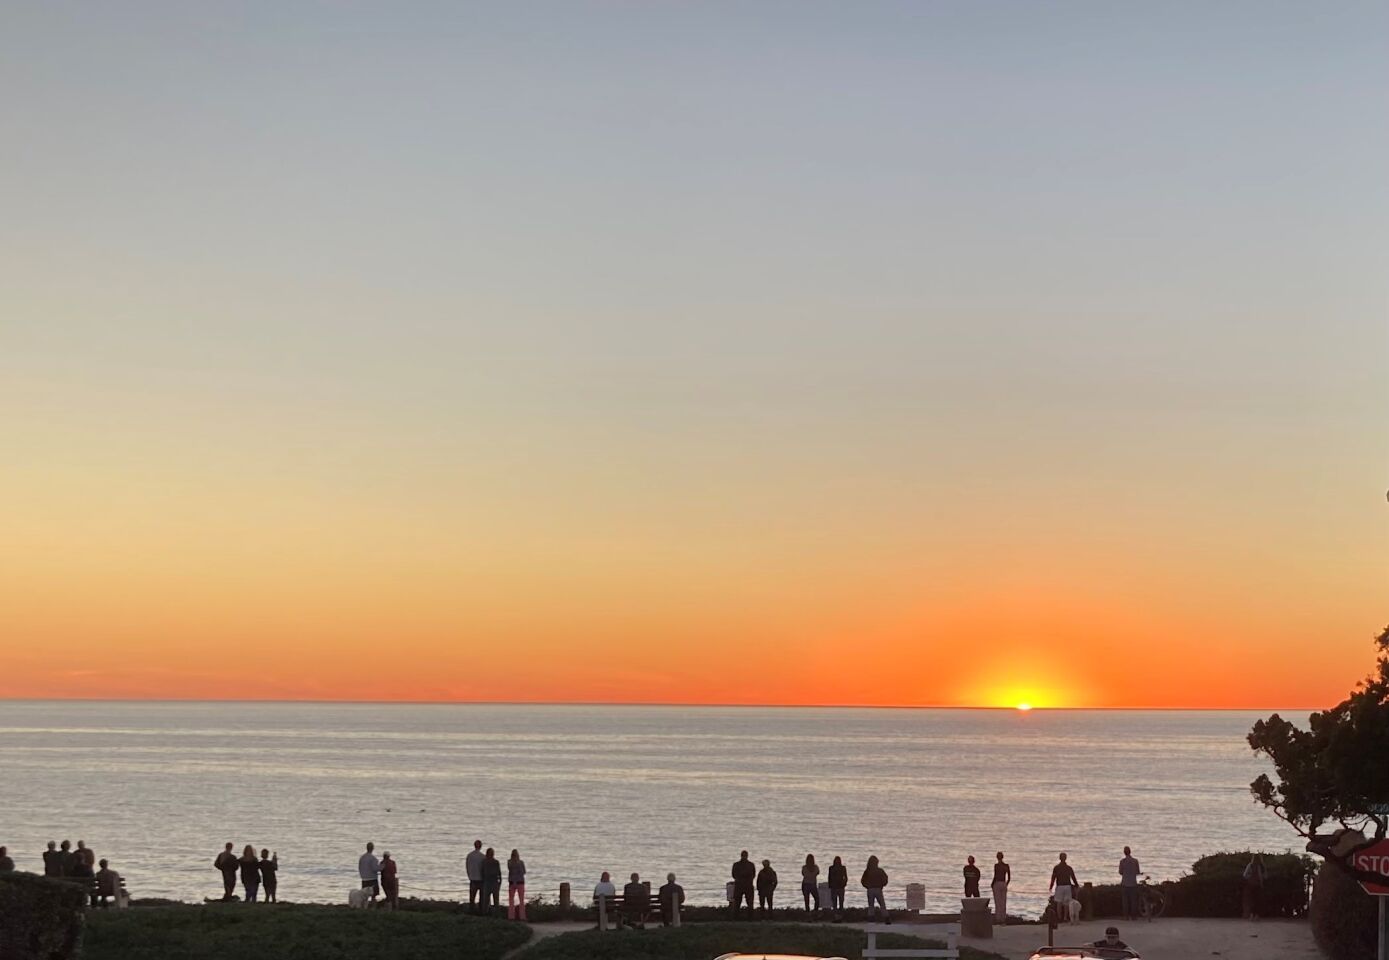 Onlookers at Windansea Beach are treated to a glowing sunset.